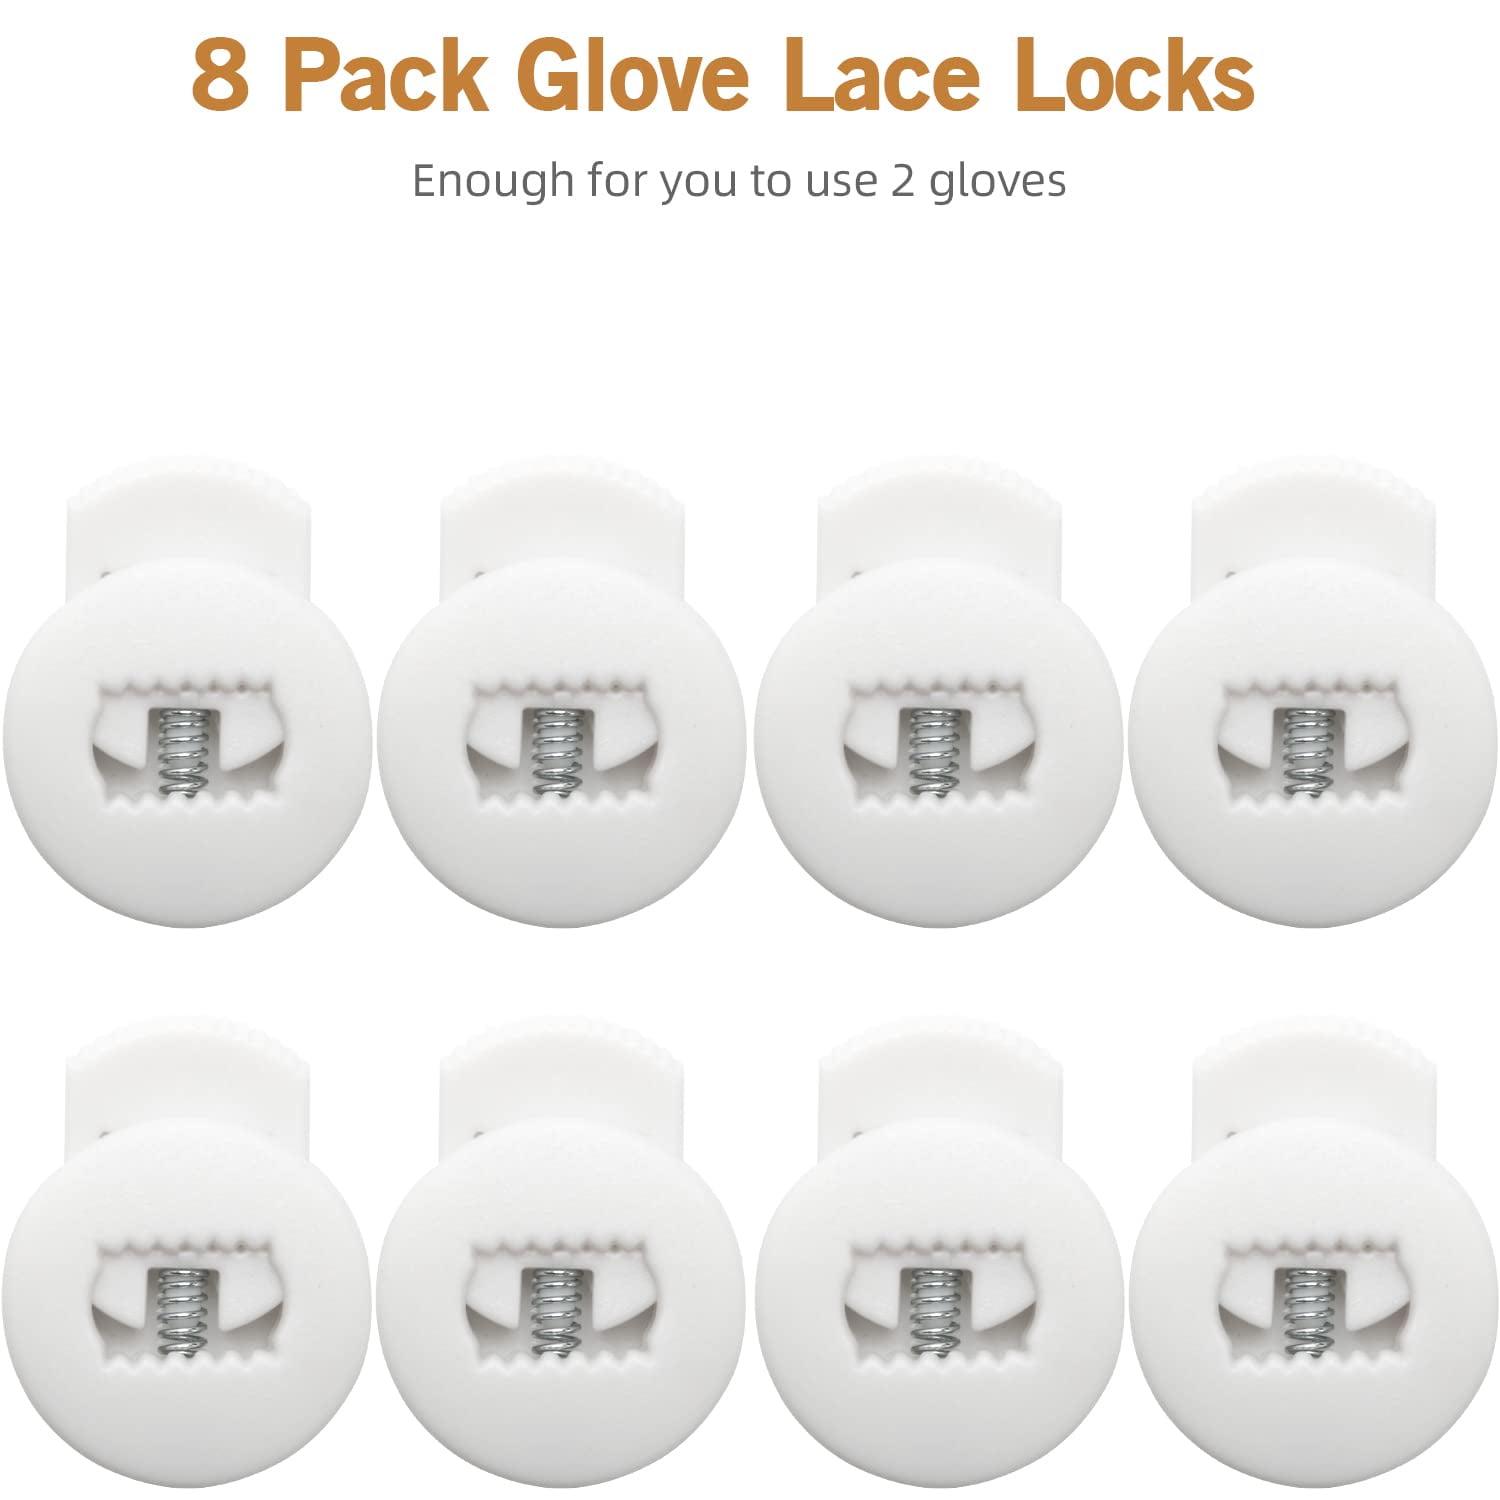  Glove Locks, 10 Pack Glove Lace Locks for Baseball Glove  Plastic Flat Round Single Holed Spring Lock No Knot Required UIInosoo for  All Gloves : Sports & Outdoors